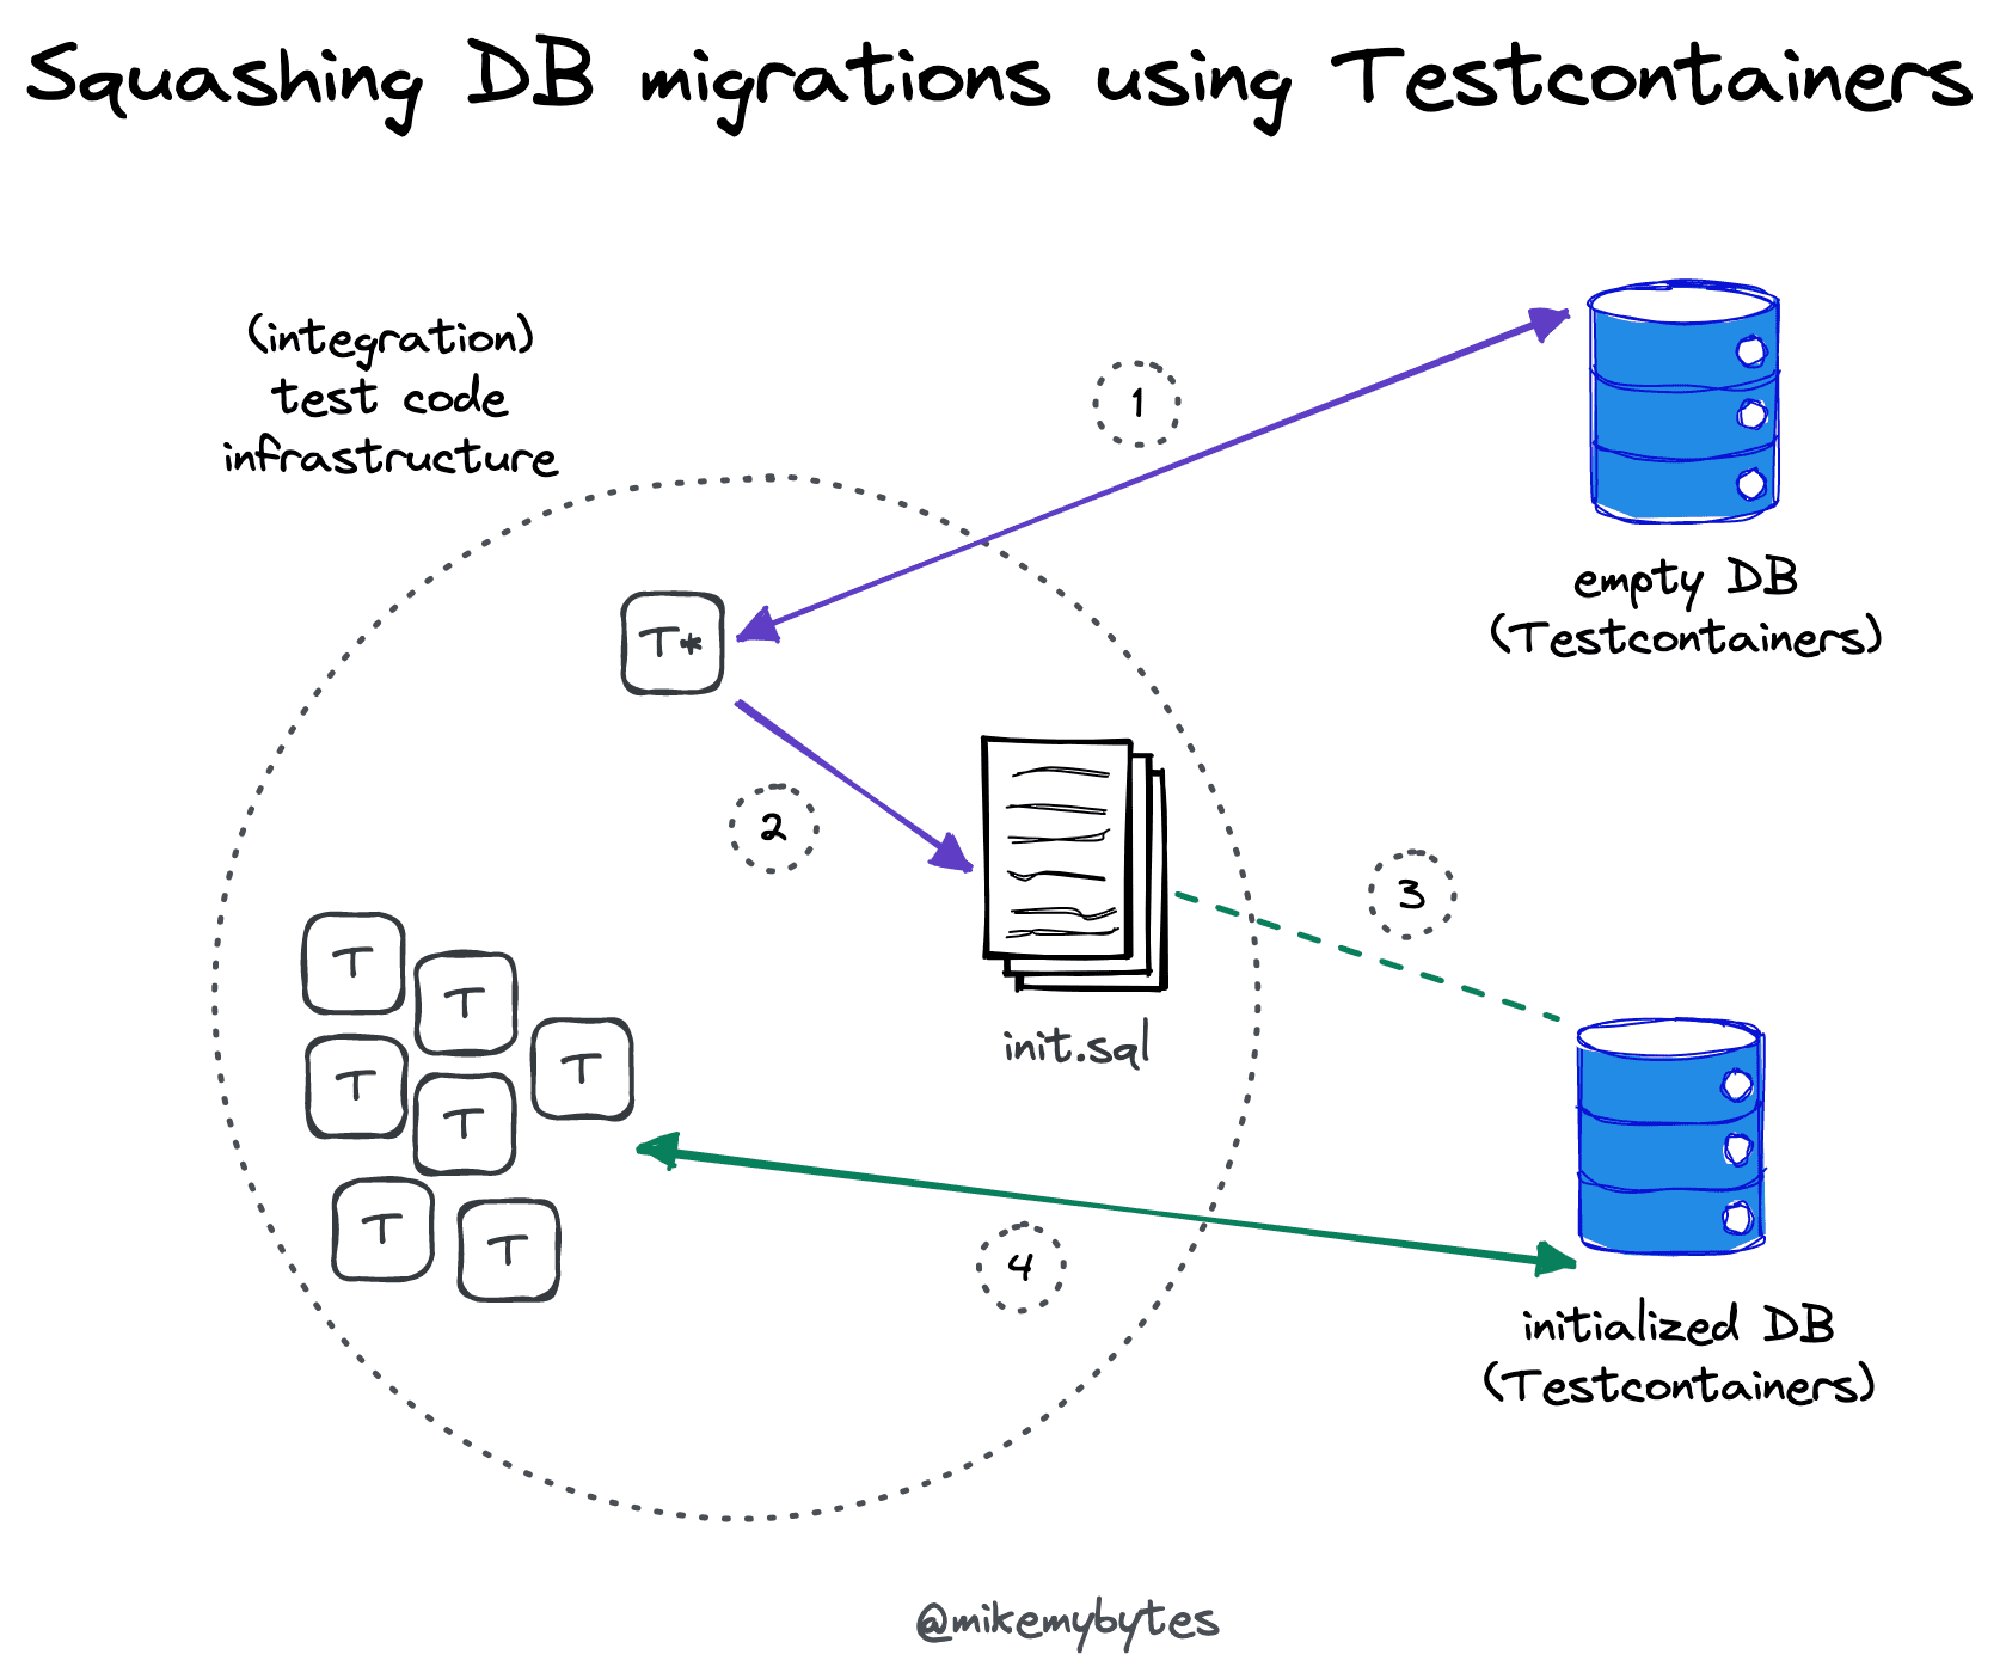 An ilustration of the DB migrations compacting approach